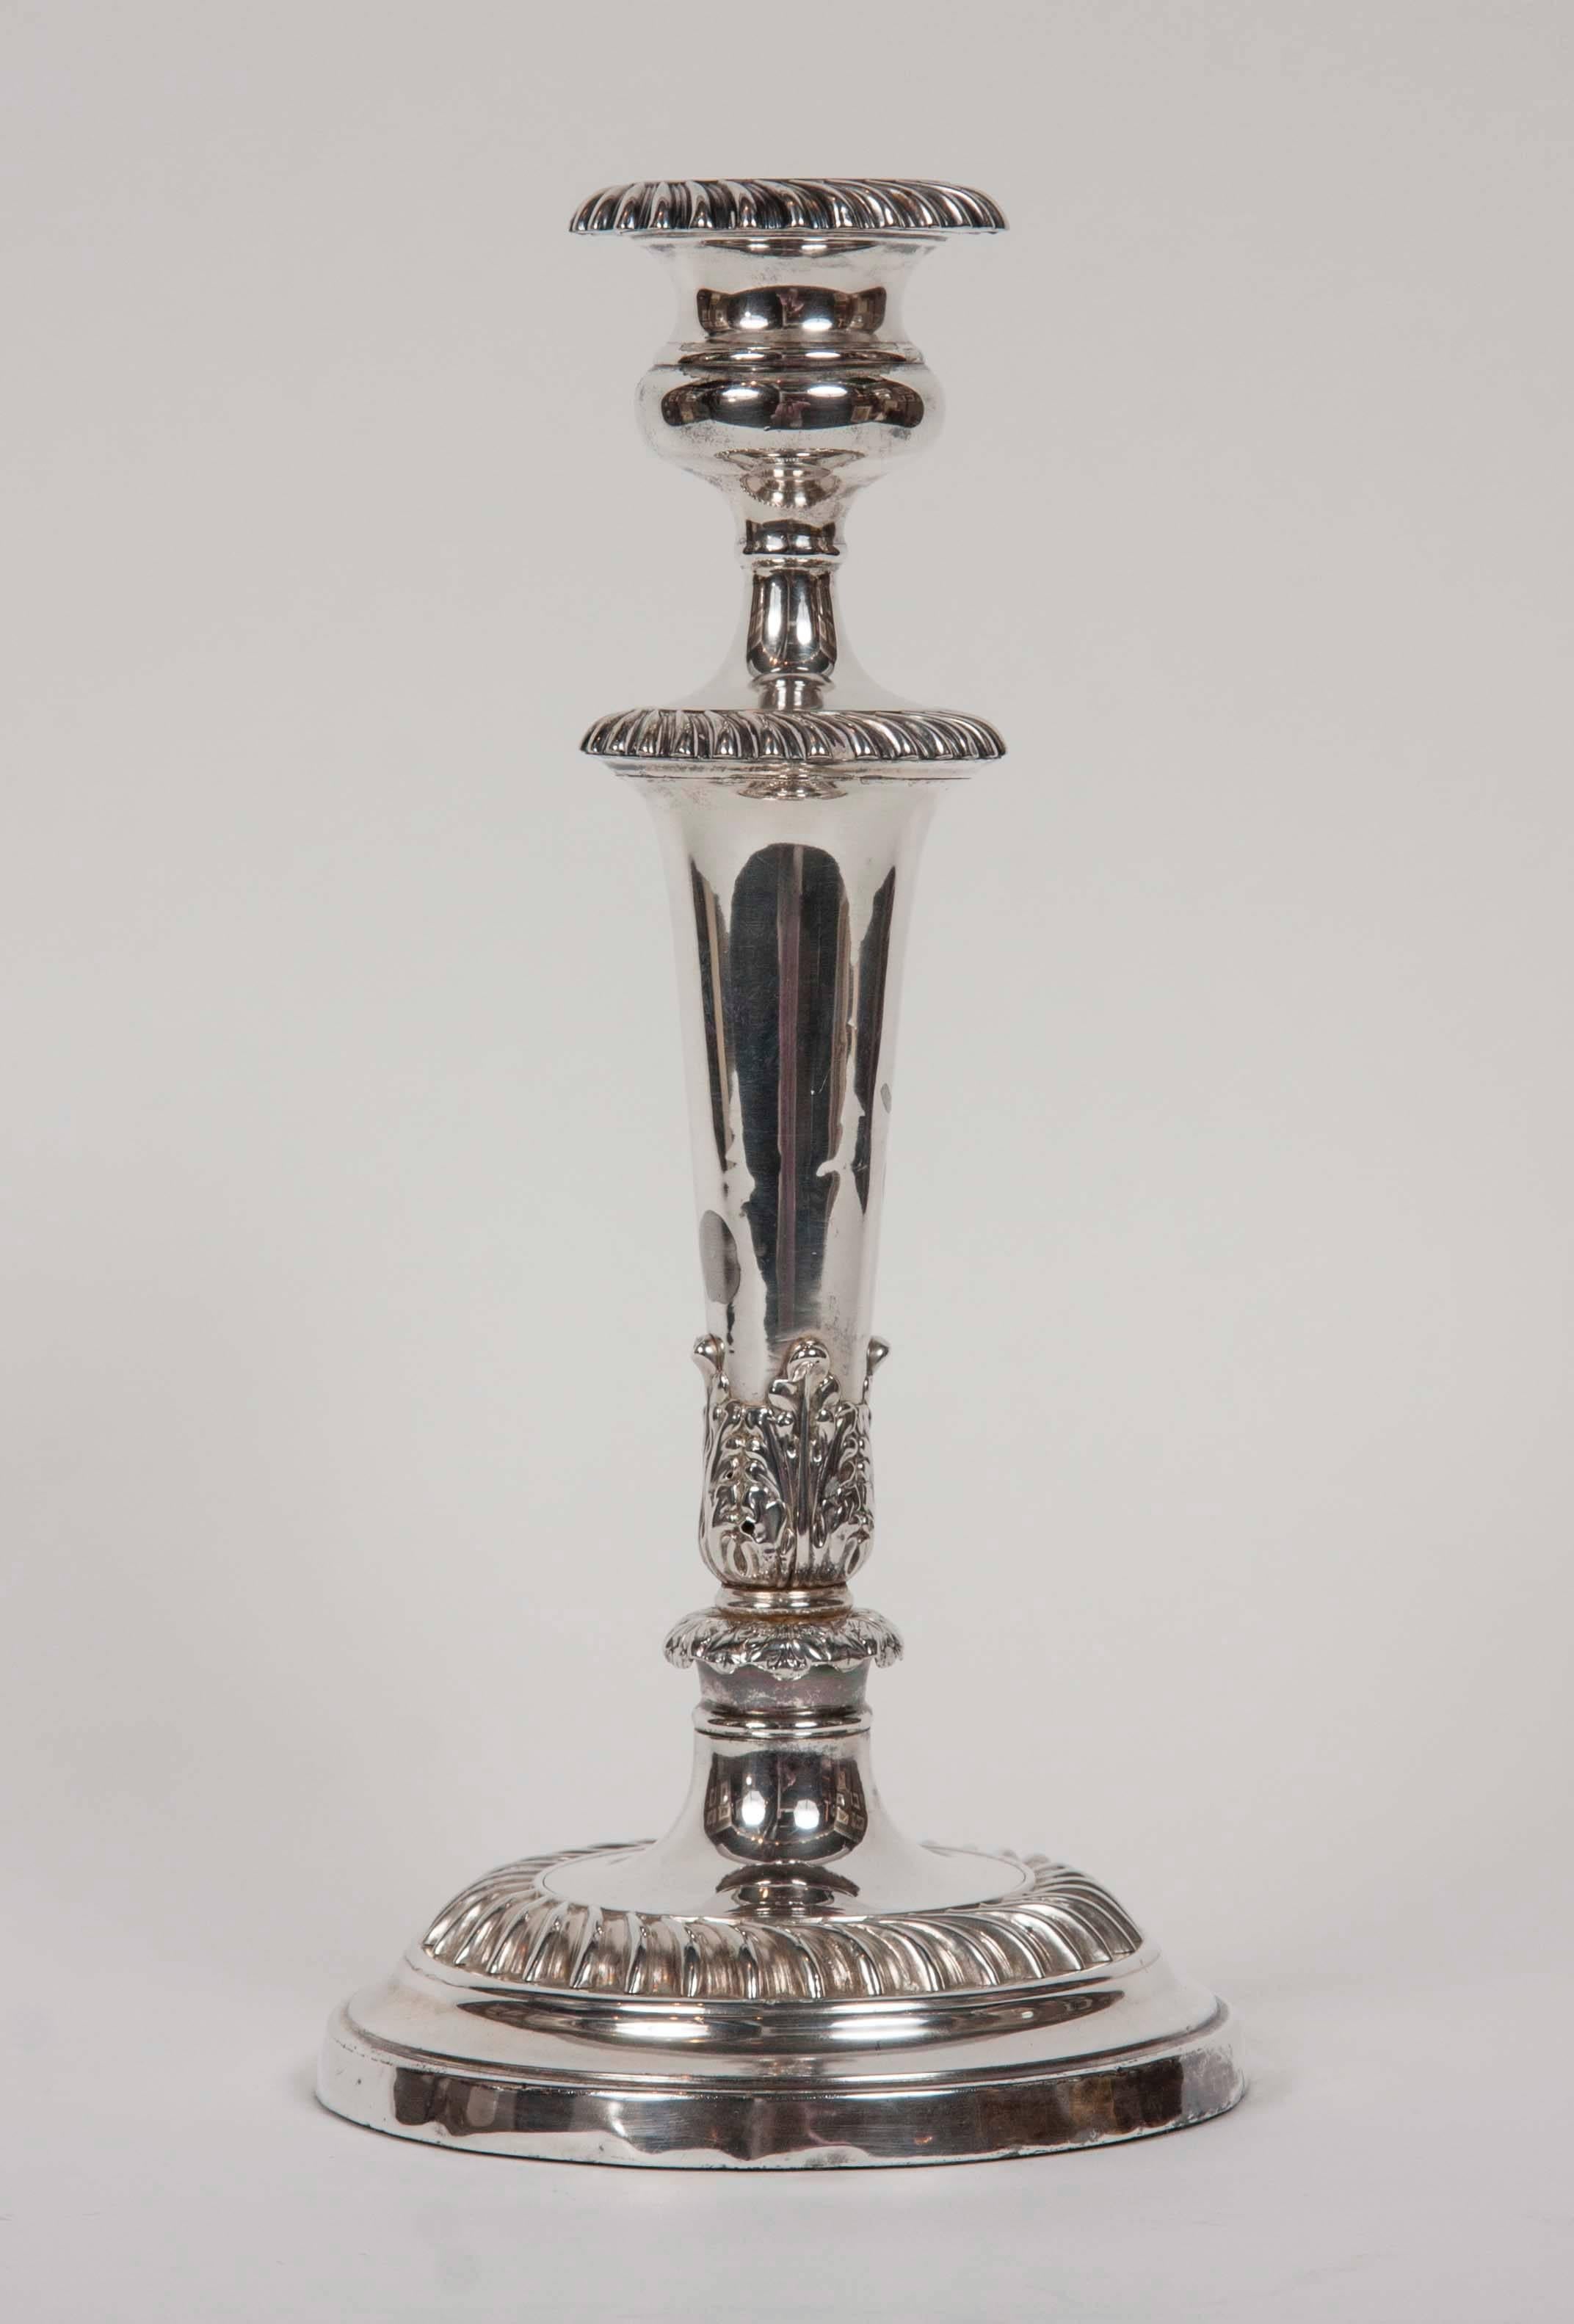 A set of four single candlesticks, marked 950 silver with circular bases and an acanthus design on the base of the column support.